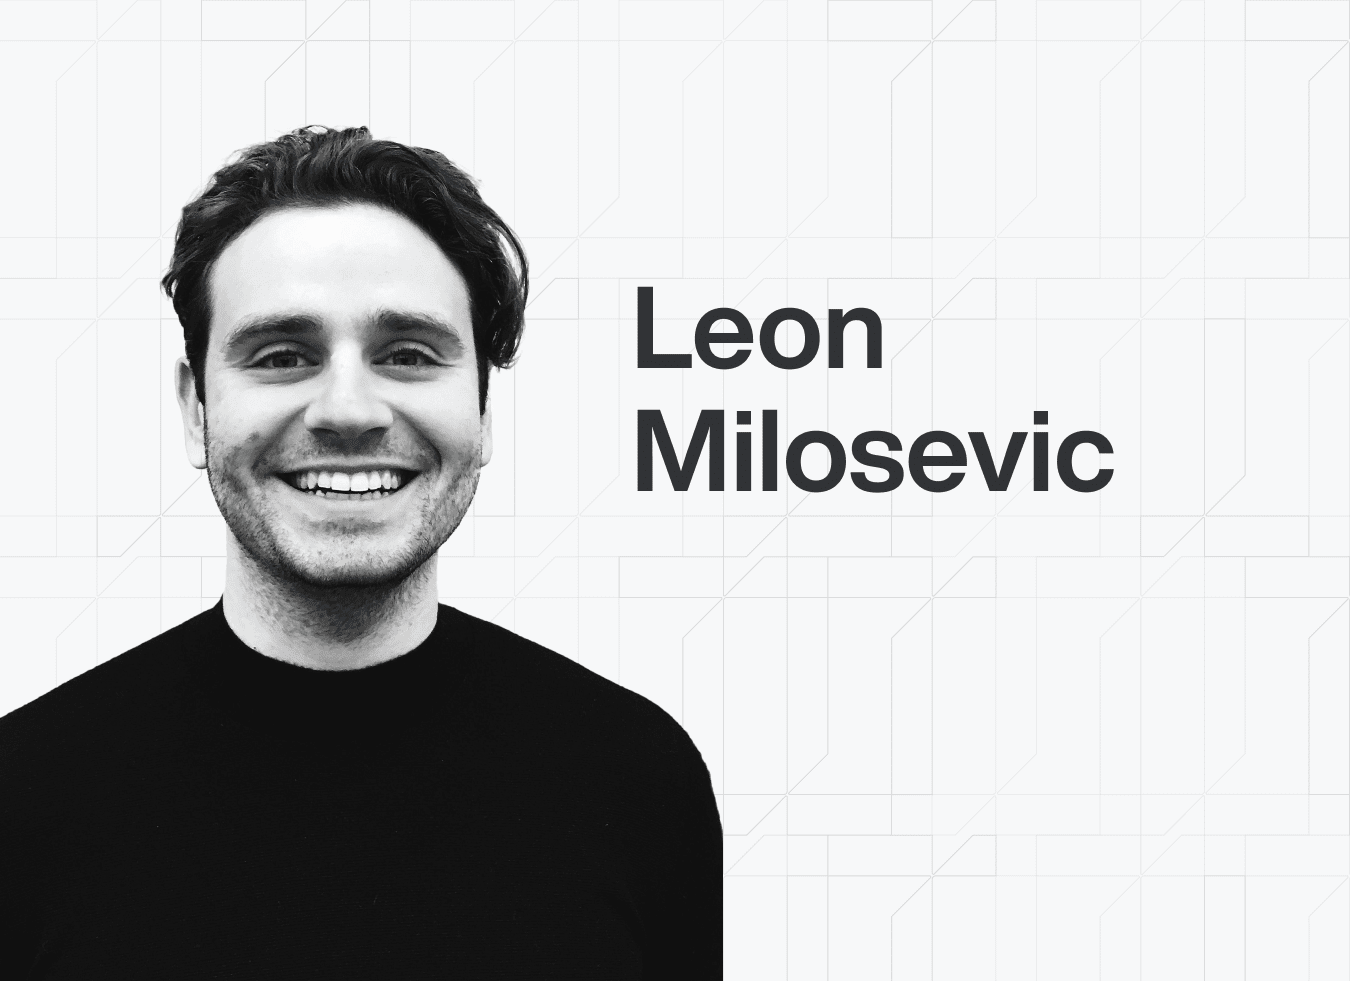 Leon Milosevic, learner at Turing College